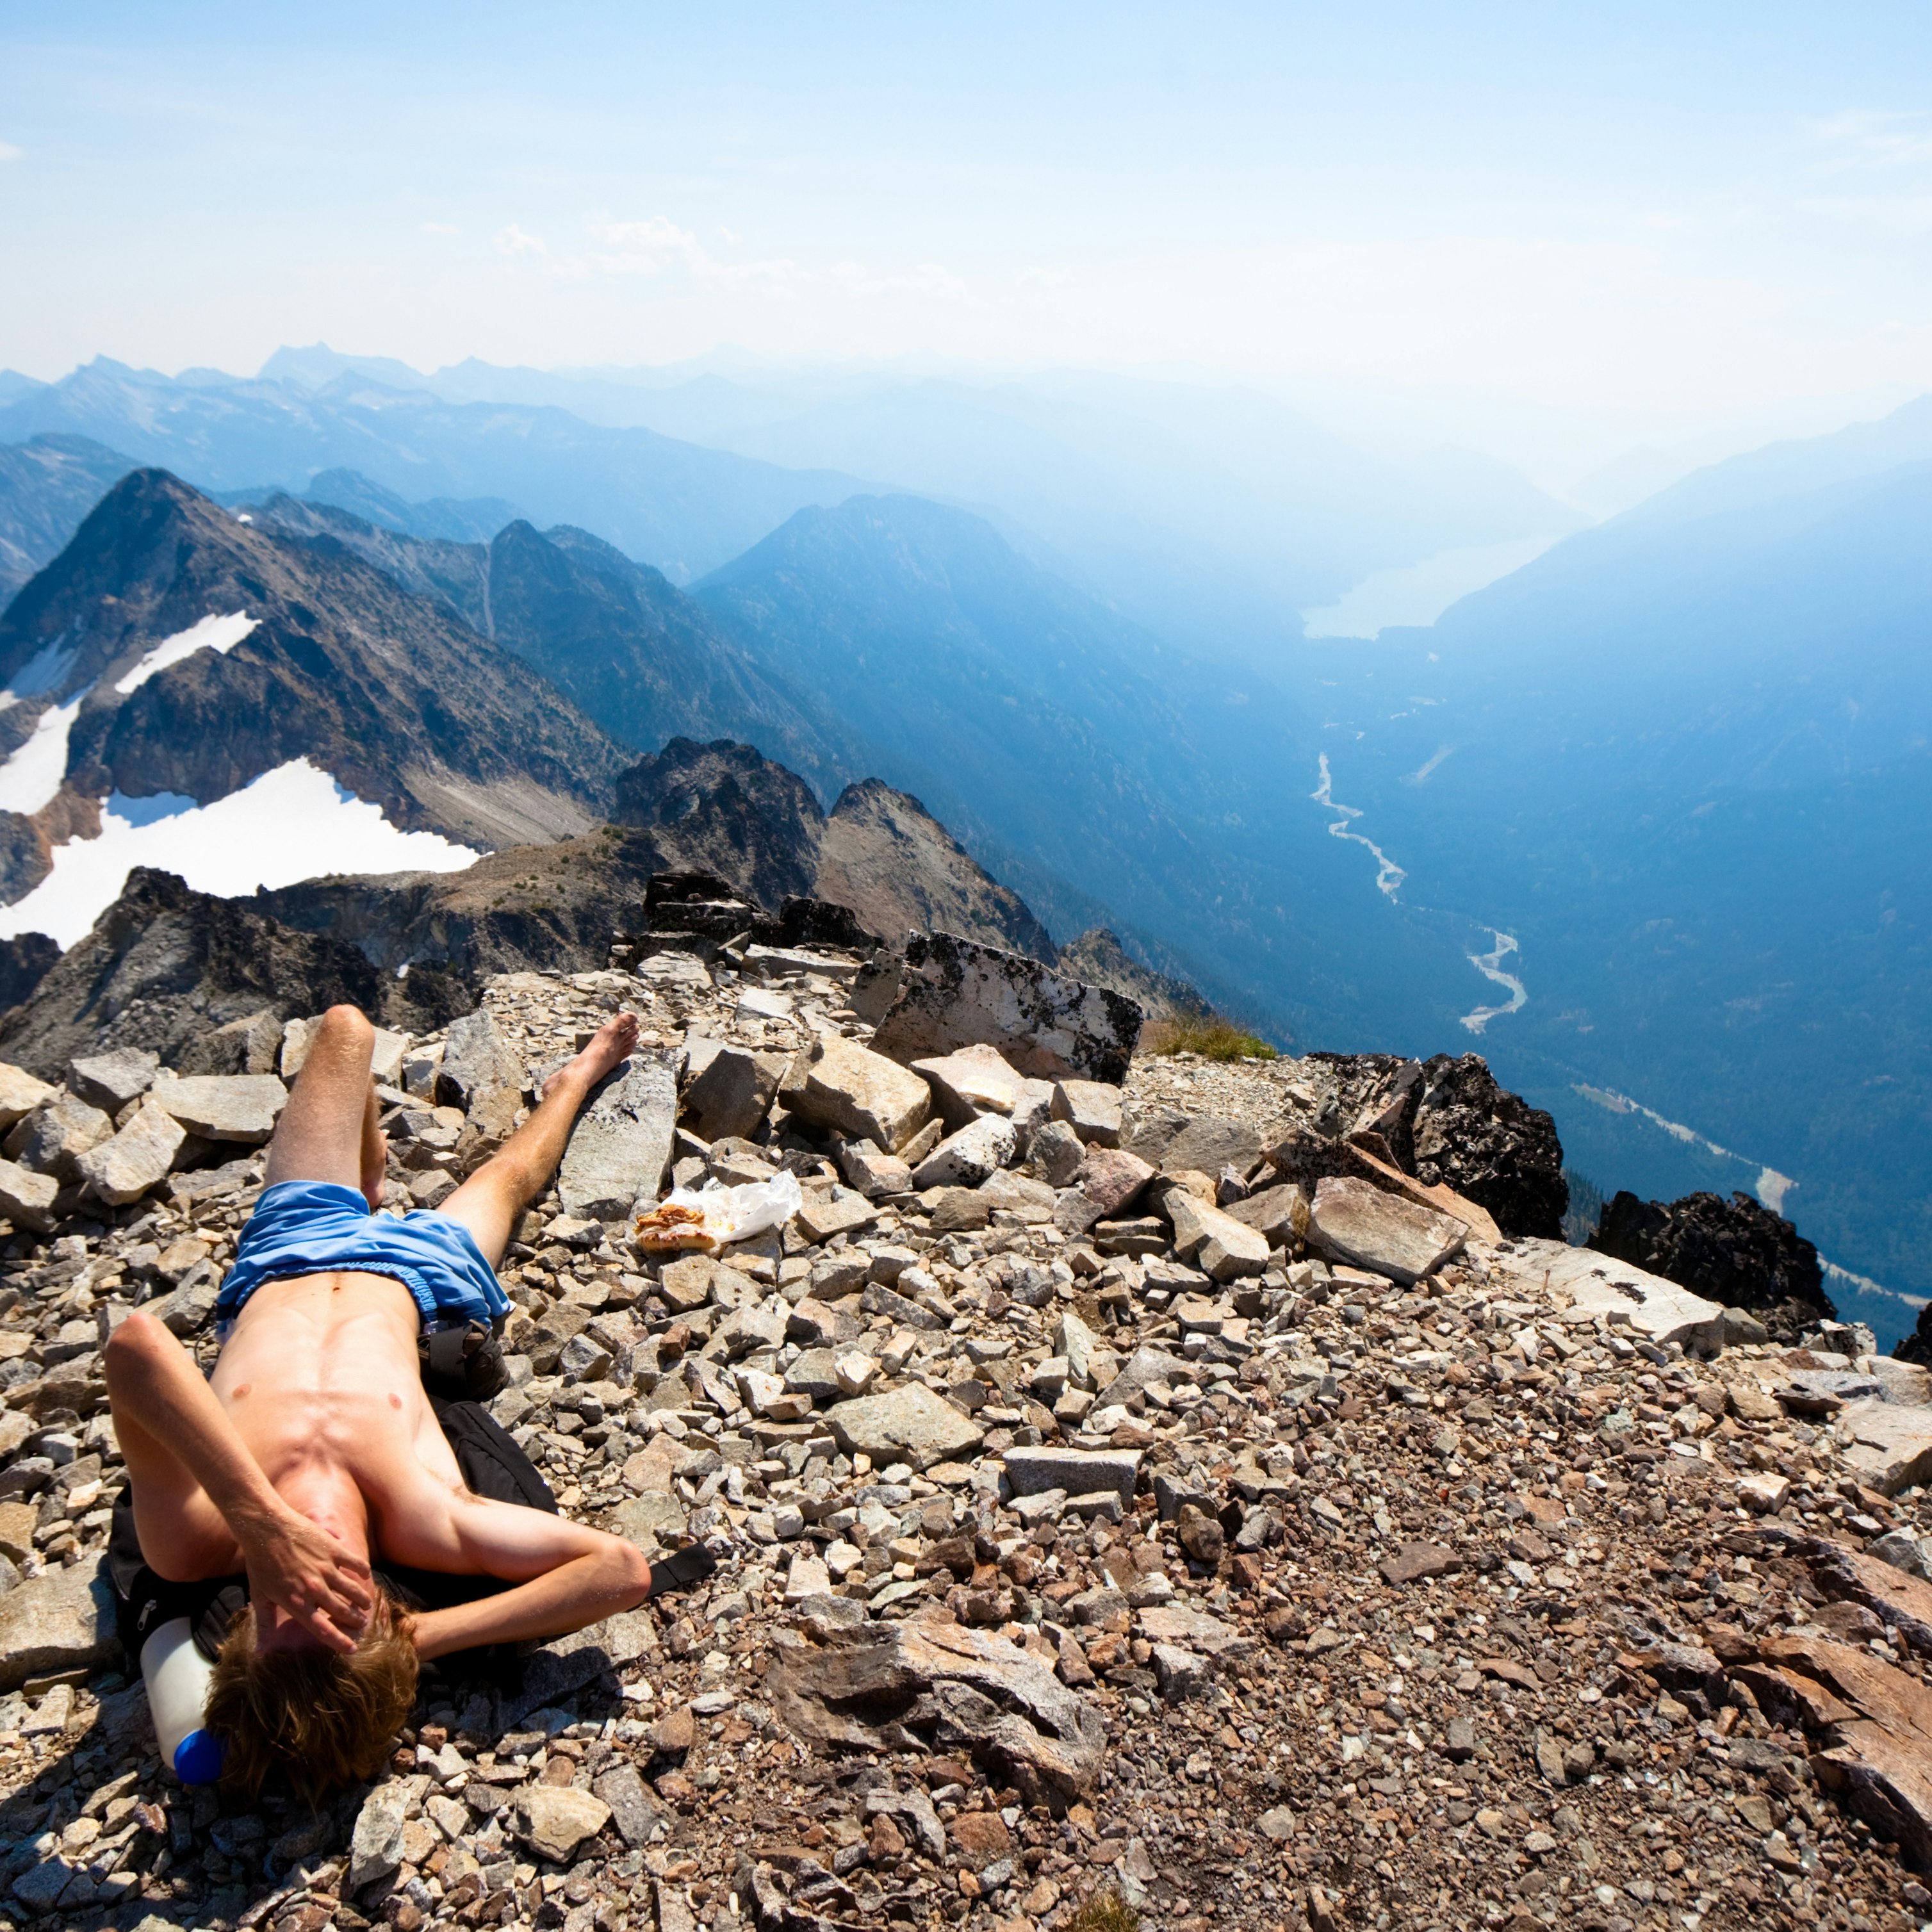 A hiker overlooking a view in the North Cascades National Park of Washington State.For more like this + imagery of young healthy folks adventuring in the out of doors do take a spin through the following: